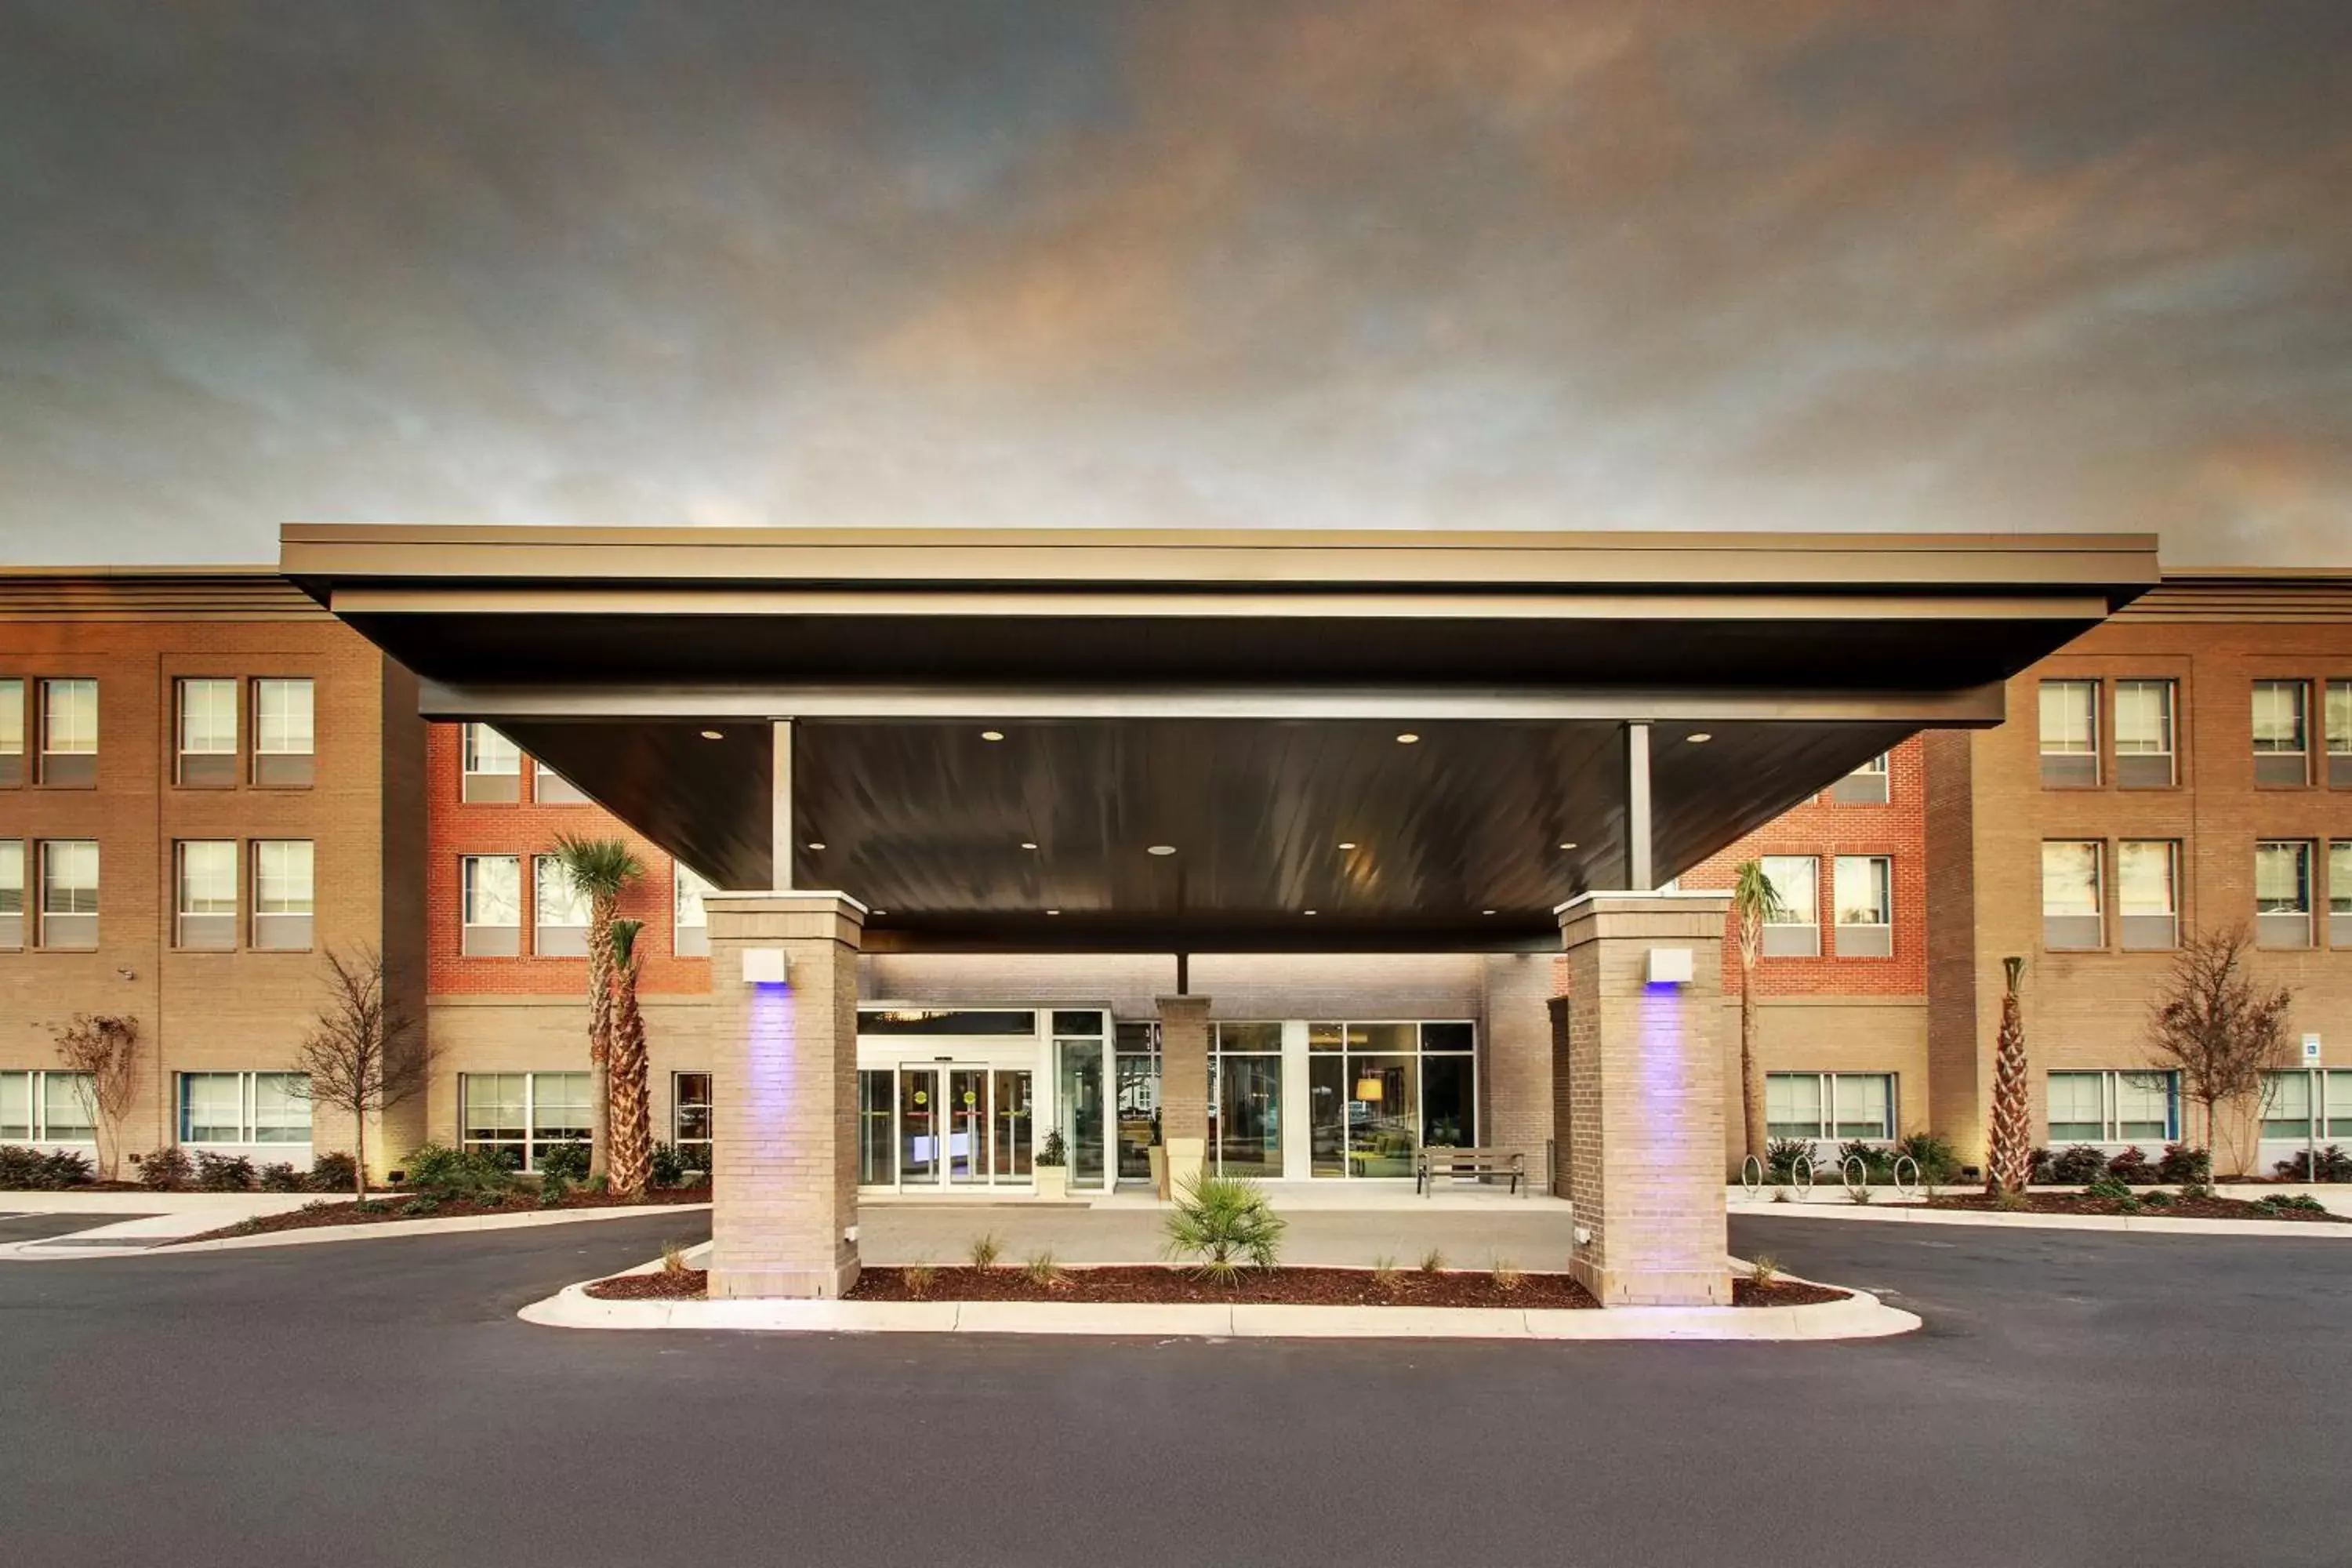 Property Building in Holiday Inn Express & Suites - Summerville, an IHG Hotel